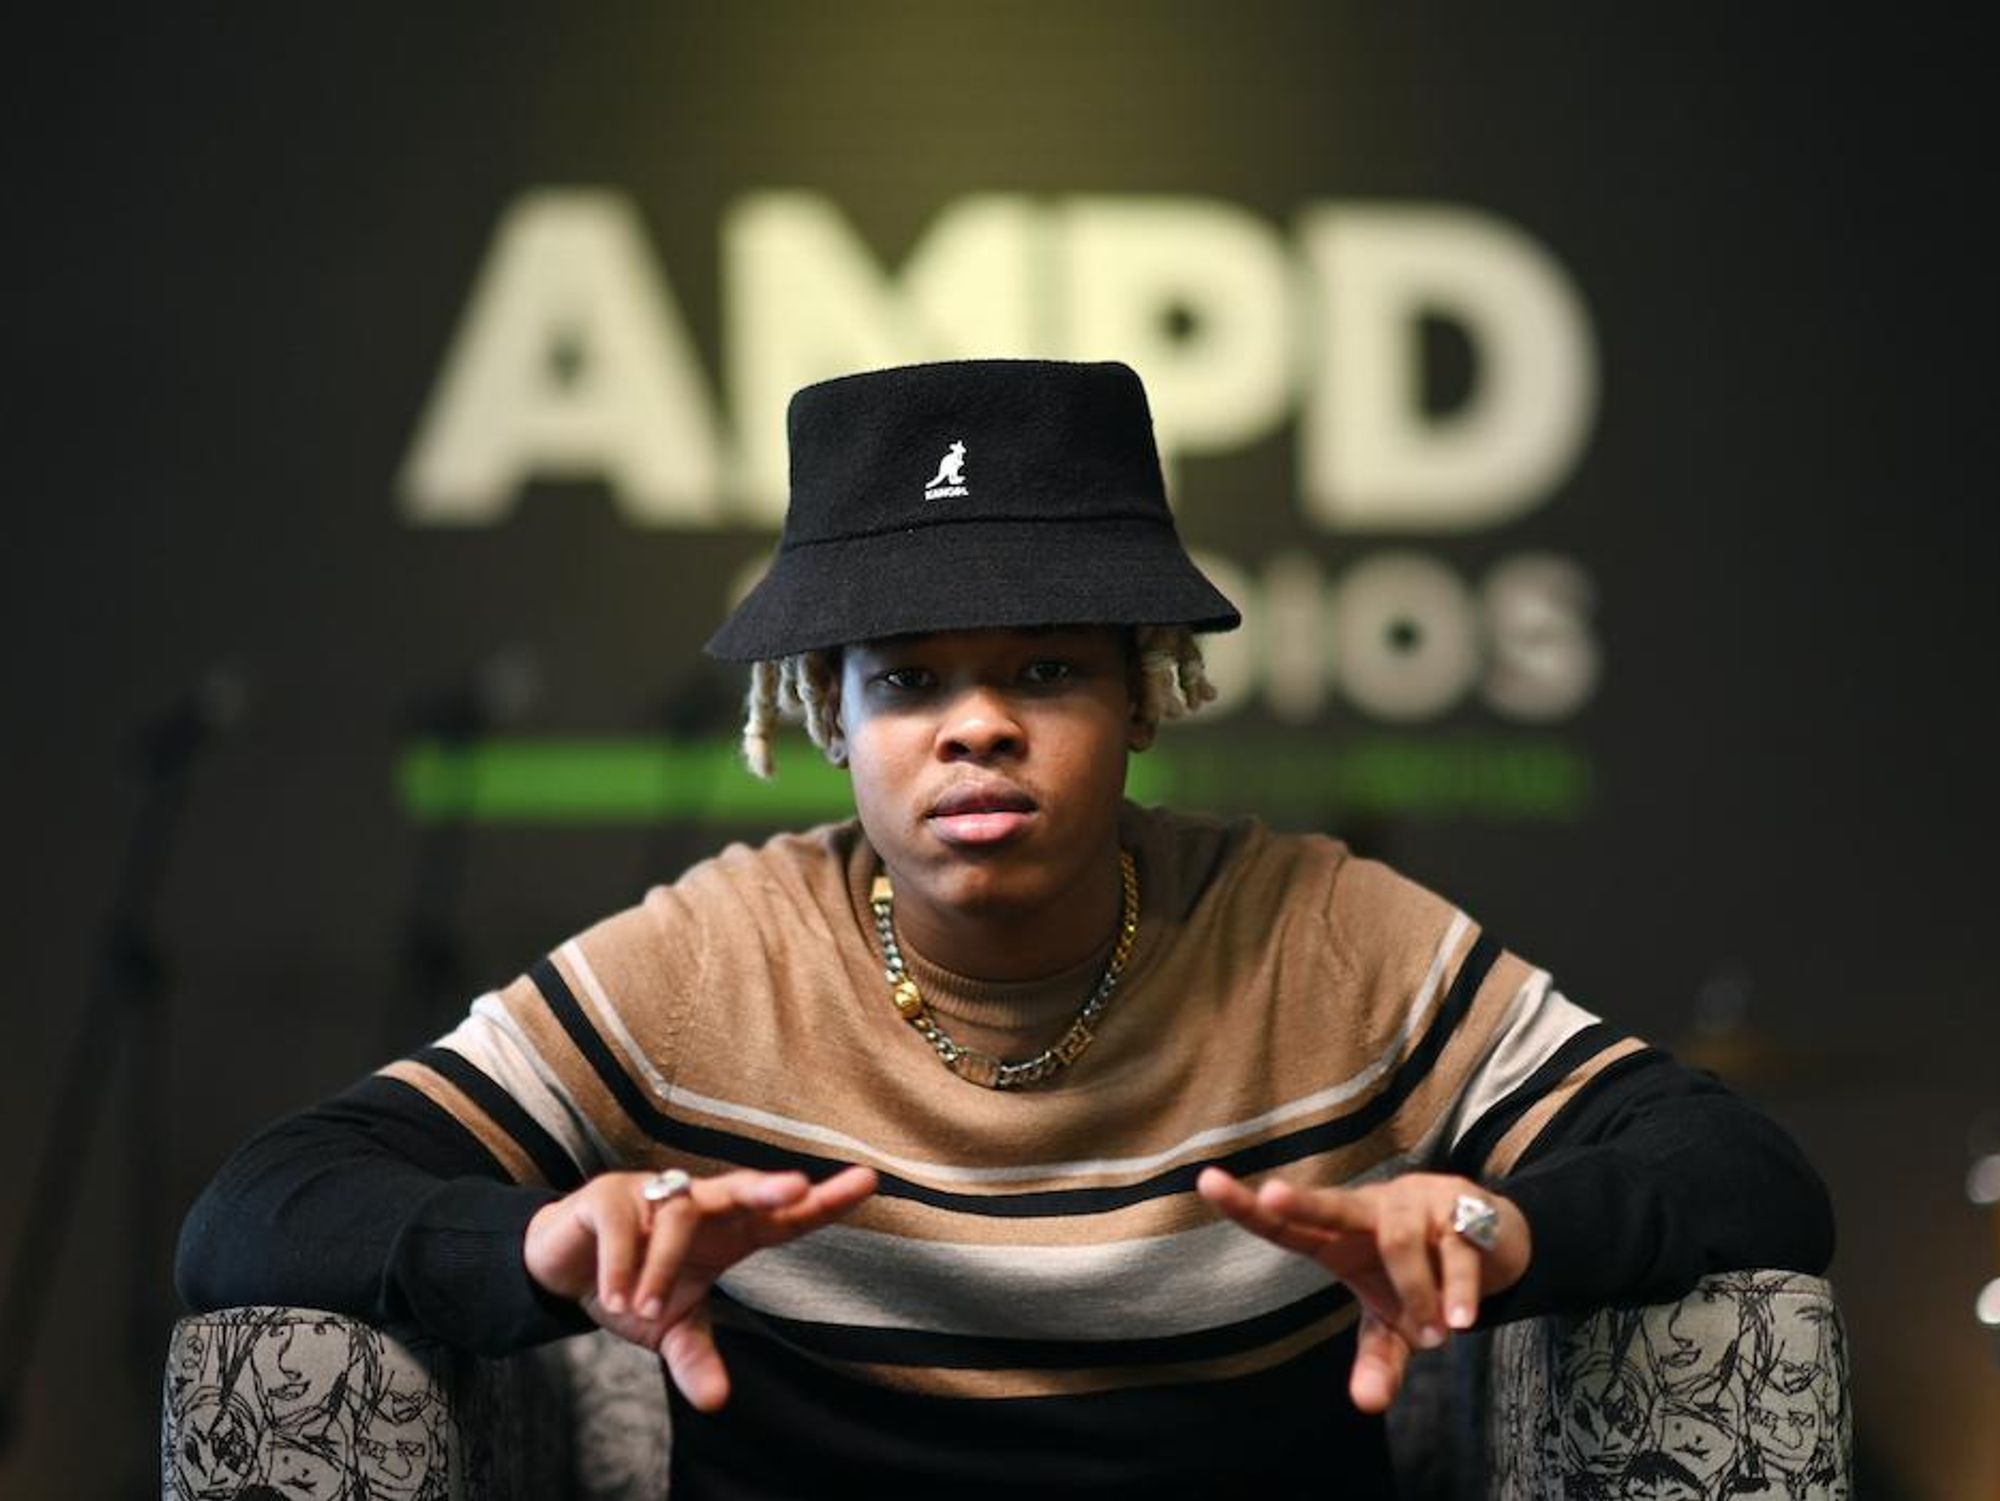 Interview: Nasty C on The Importance of Sharing His Story